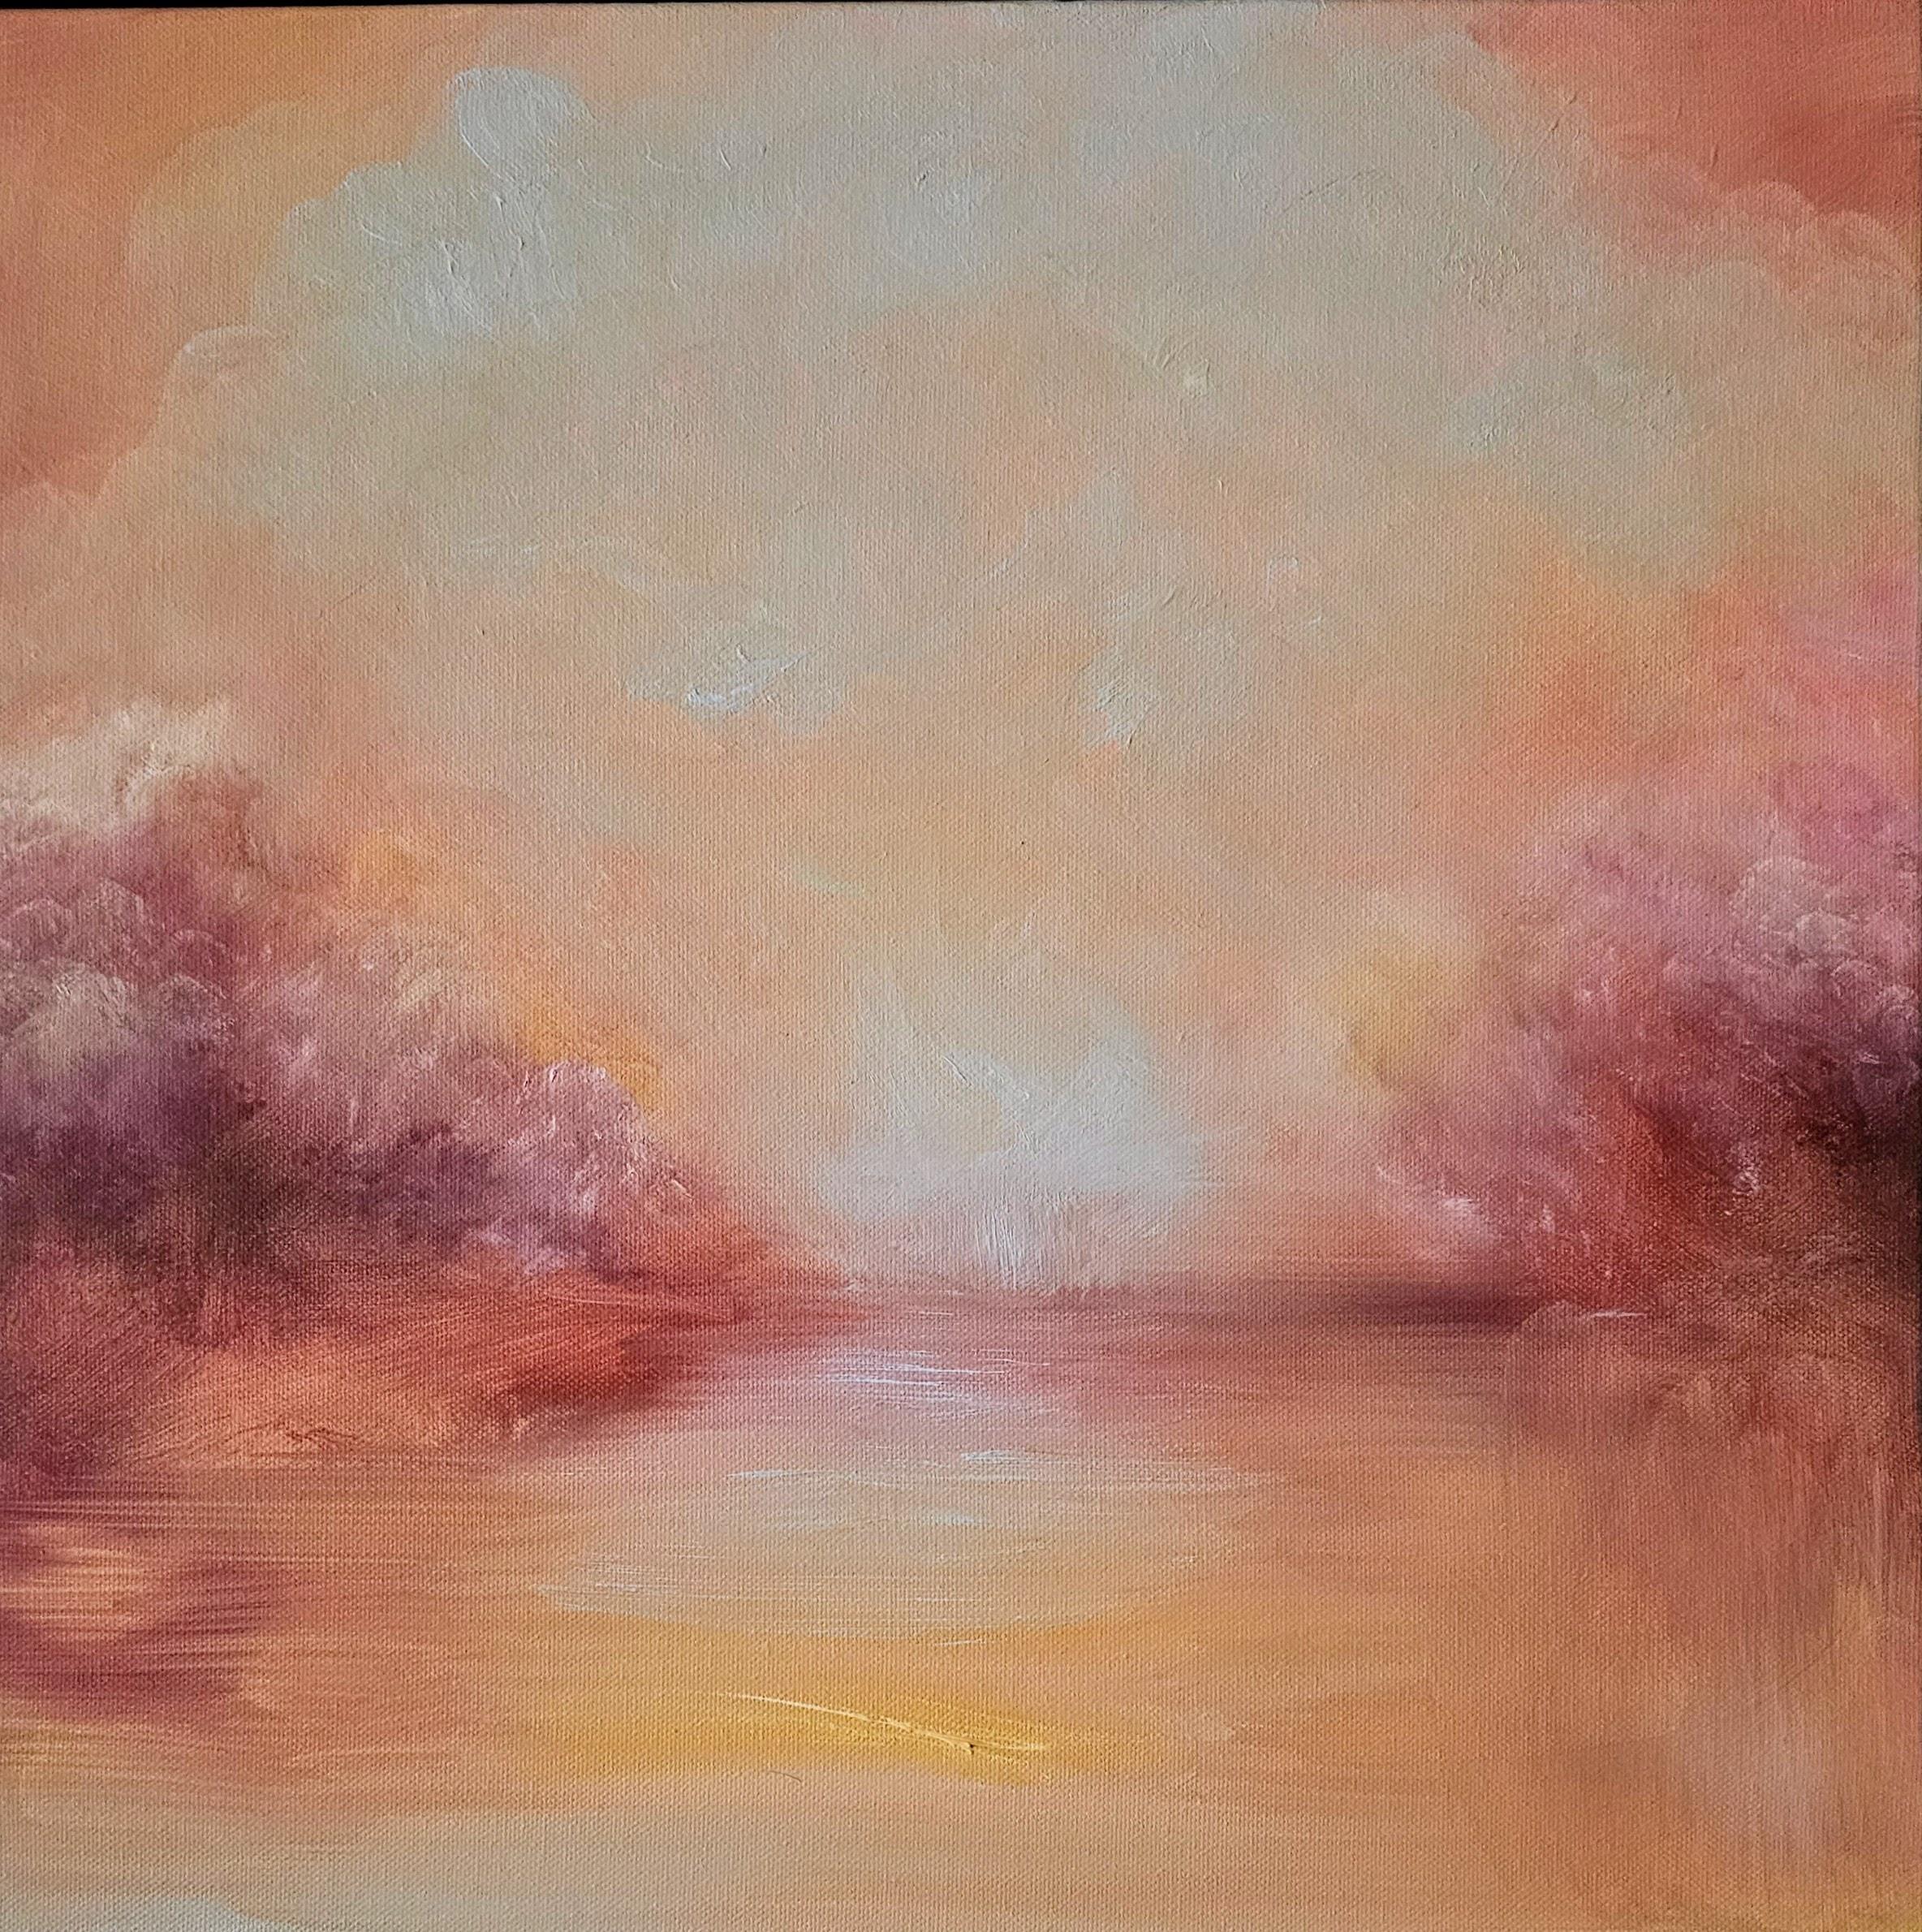 Jennifer L. Baker Landscape Painting - And then there was light - Abstract gold and orange sunset landscape painting